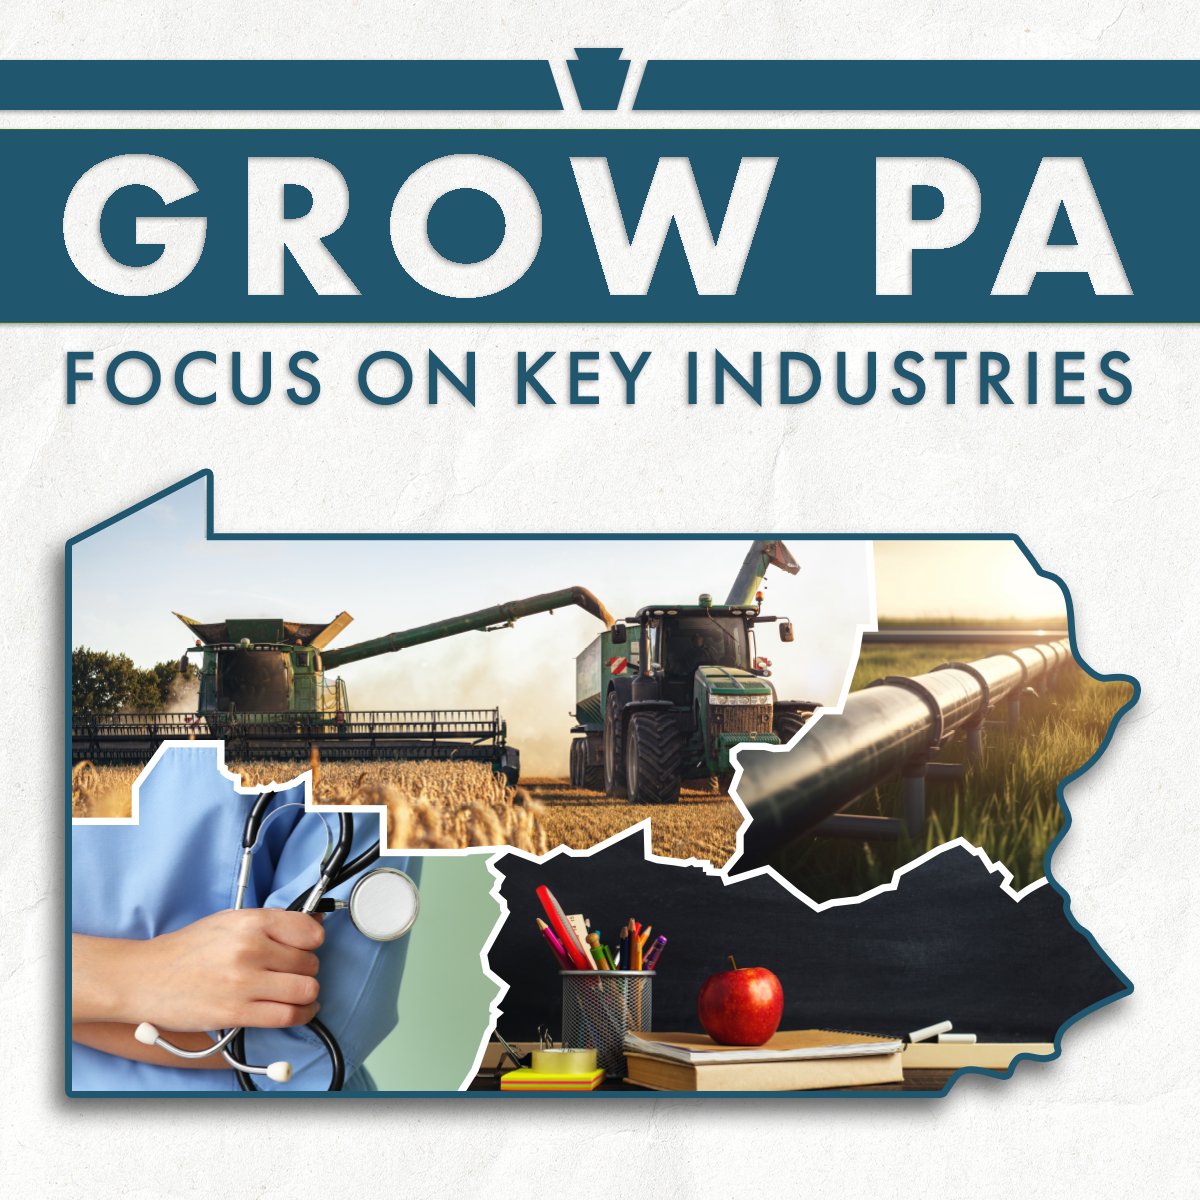 We’ve proposed a new Grow PA Scholarship Grant Program to make college more affordable for students in high-demand industries like agriculture 🐄energy 💡health care 🩺education 📚law enforcement 🚔and more: bit.ly/4aPE02J @SenatorMartinPA @SenatorArgall @Sen_Pennycuick